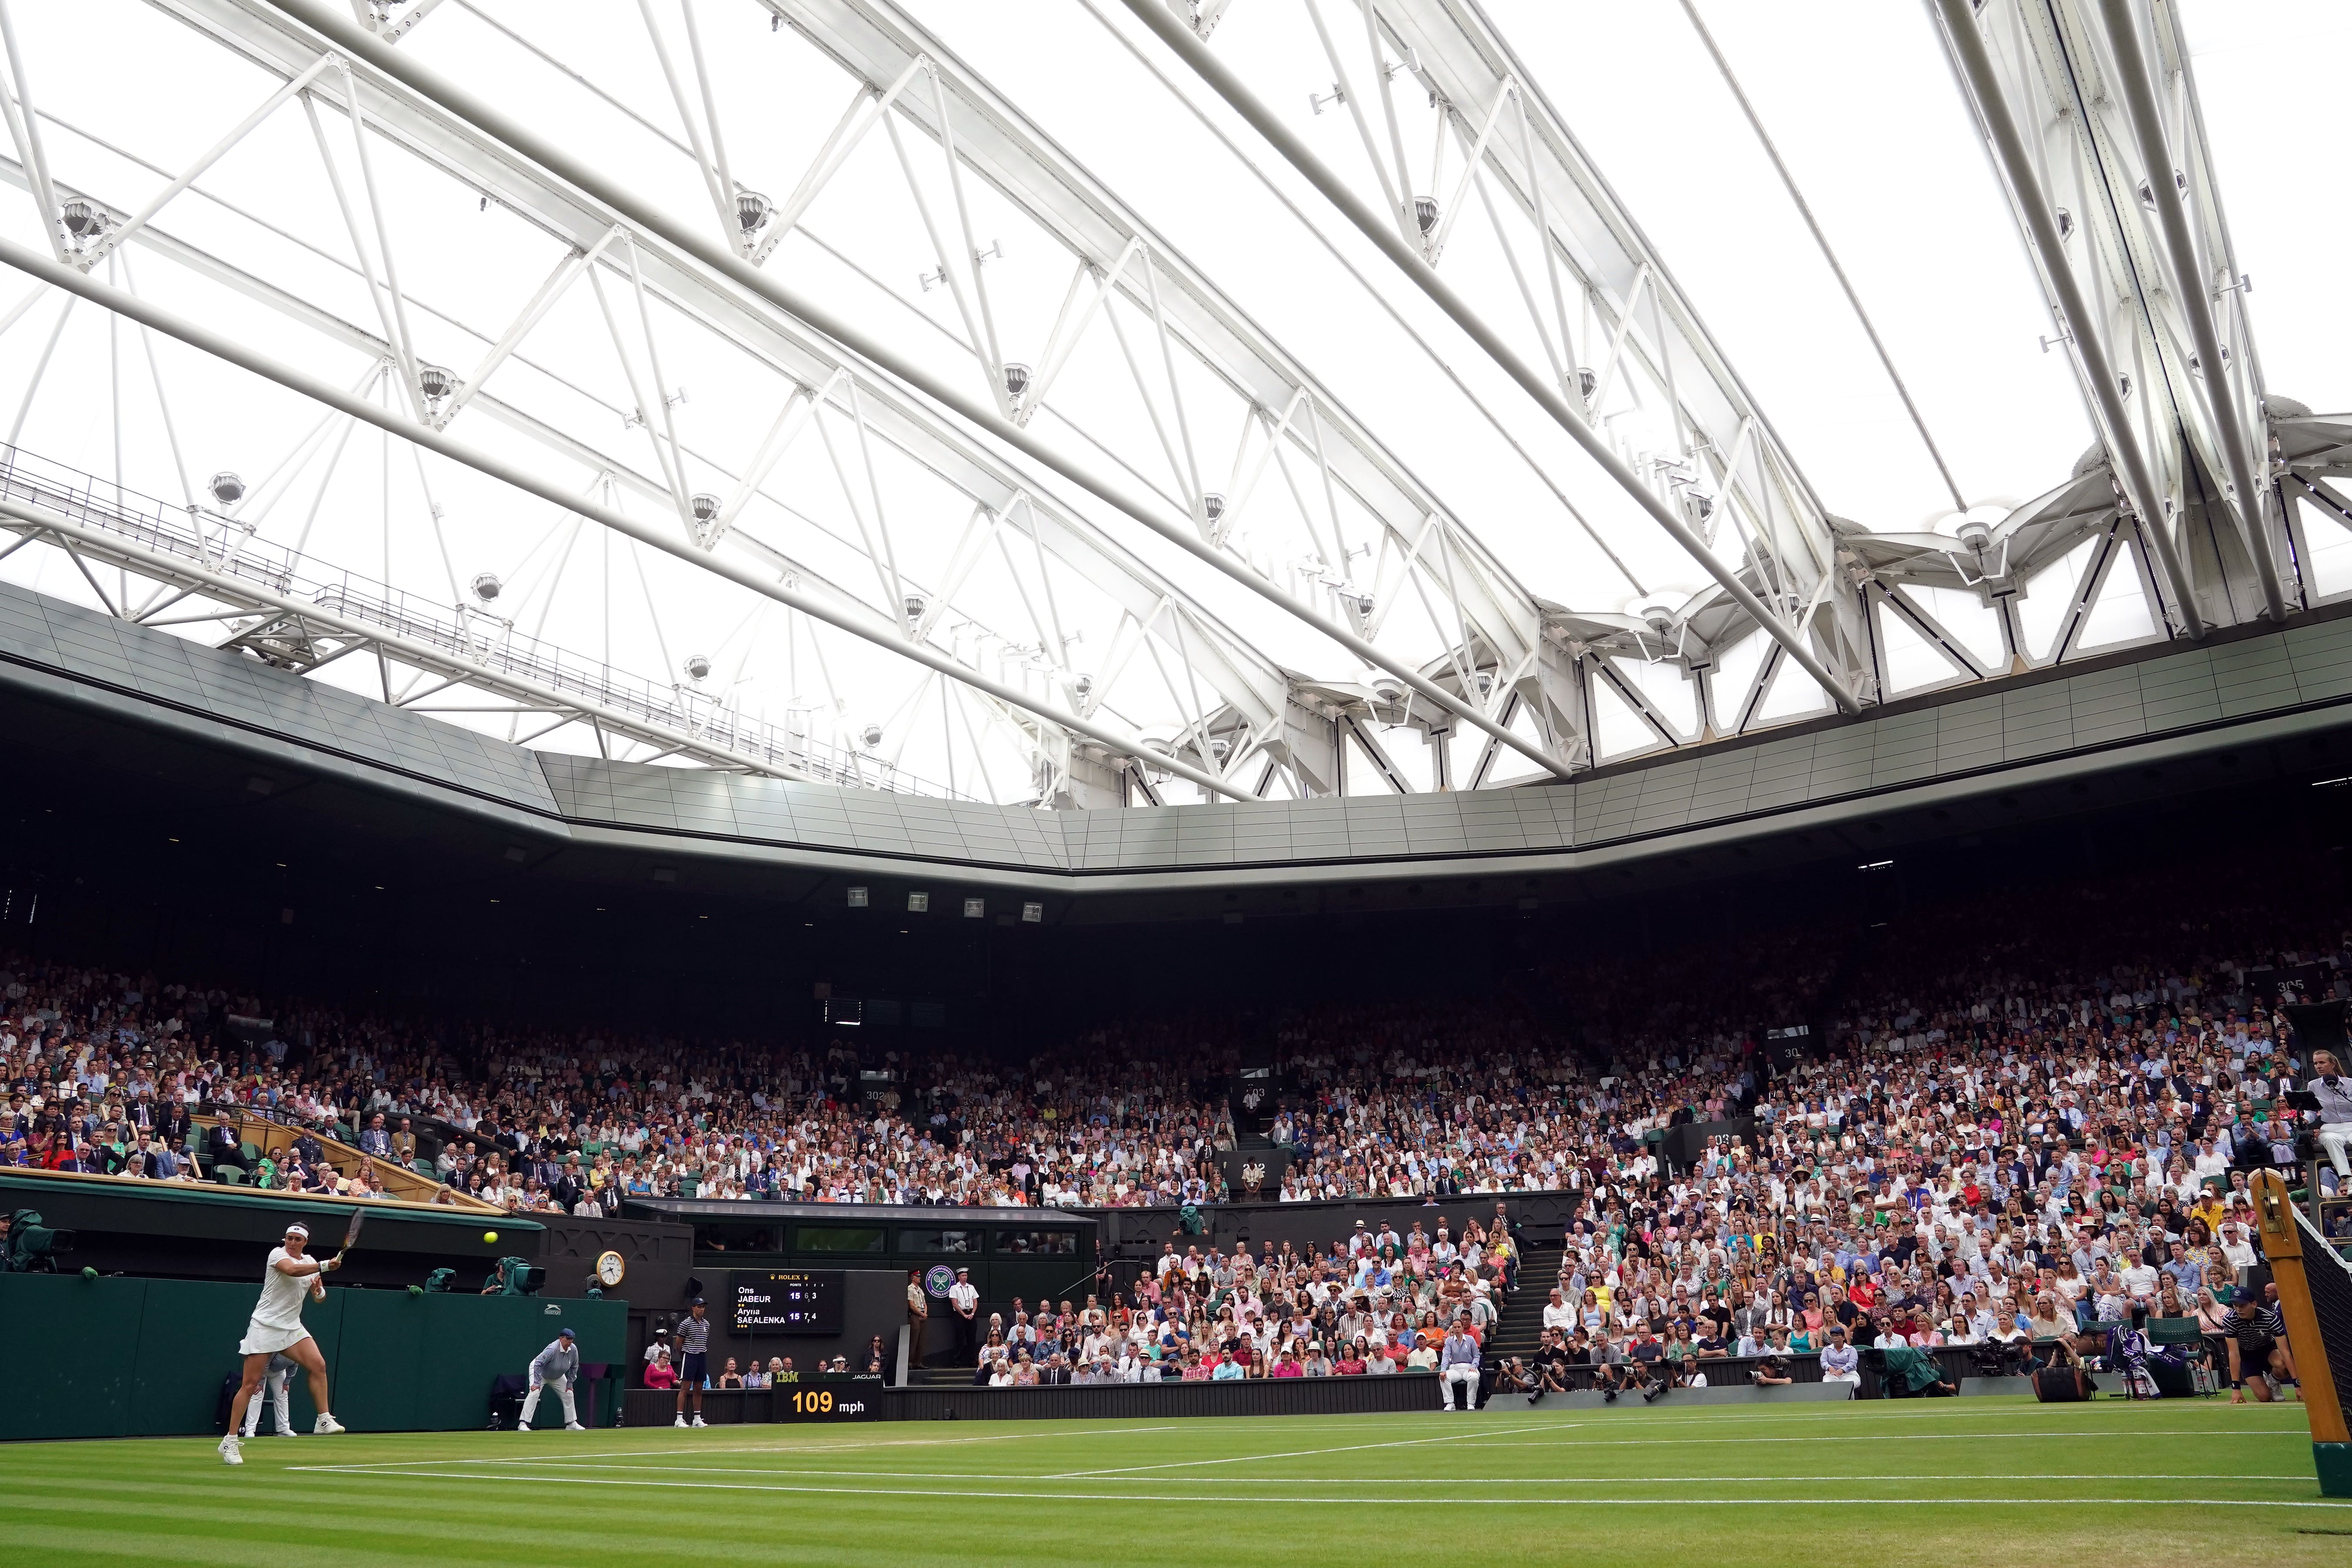 AELTC hopes the development will increase the capacity of the championships to 50,000